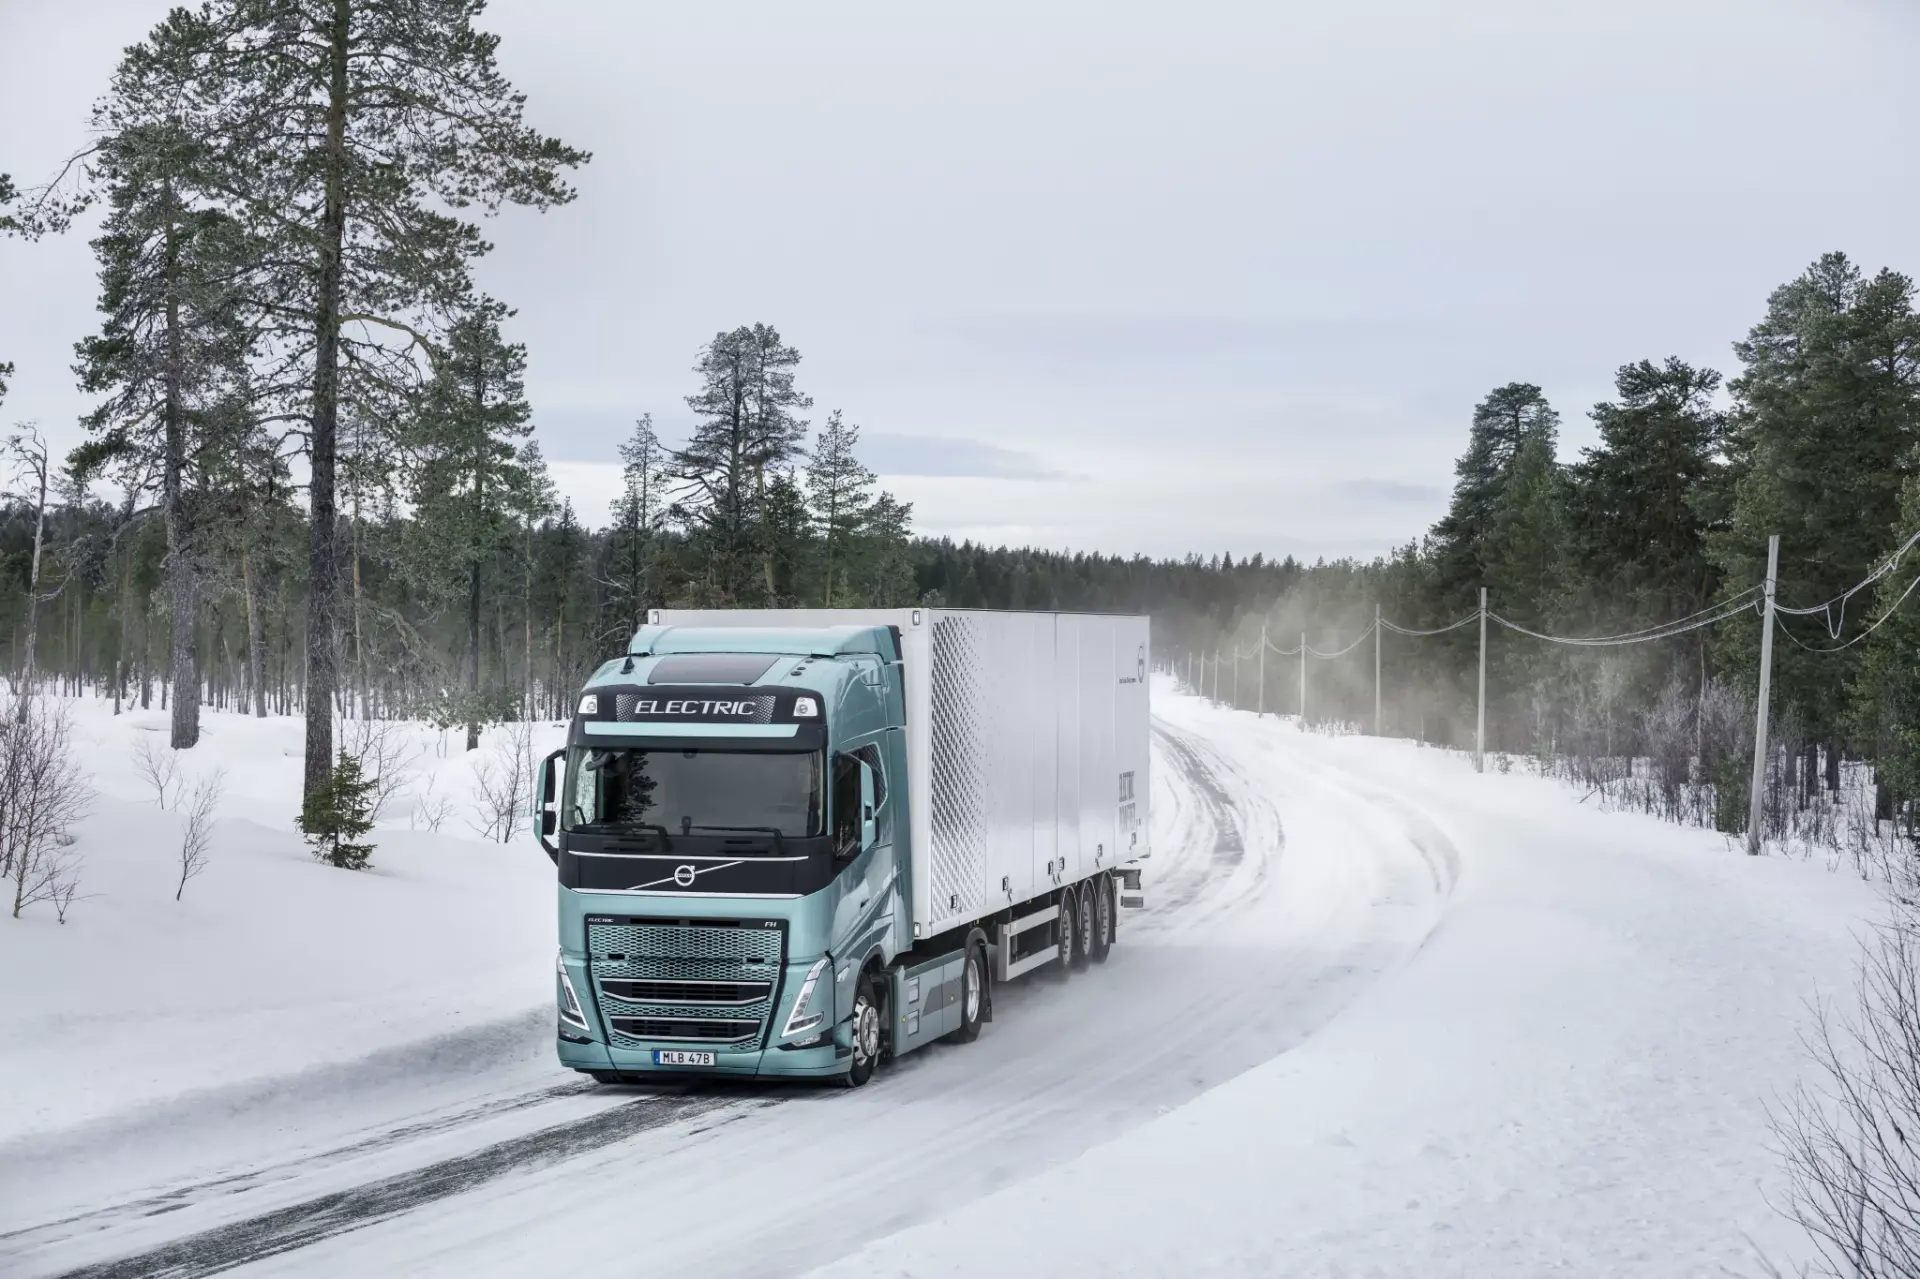 Volvos electric trucks tested in extreme winter weather 3